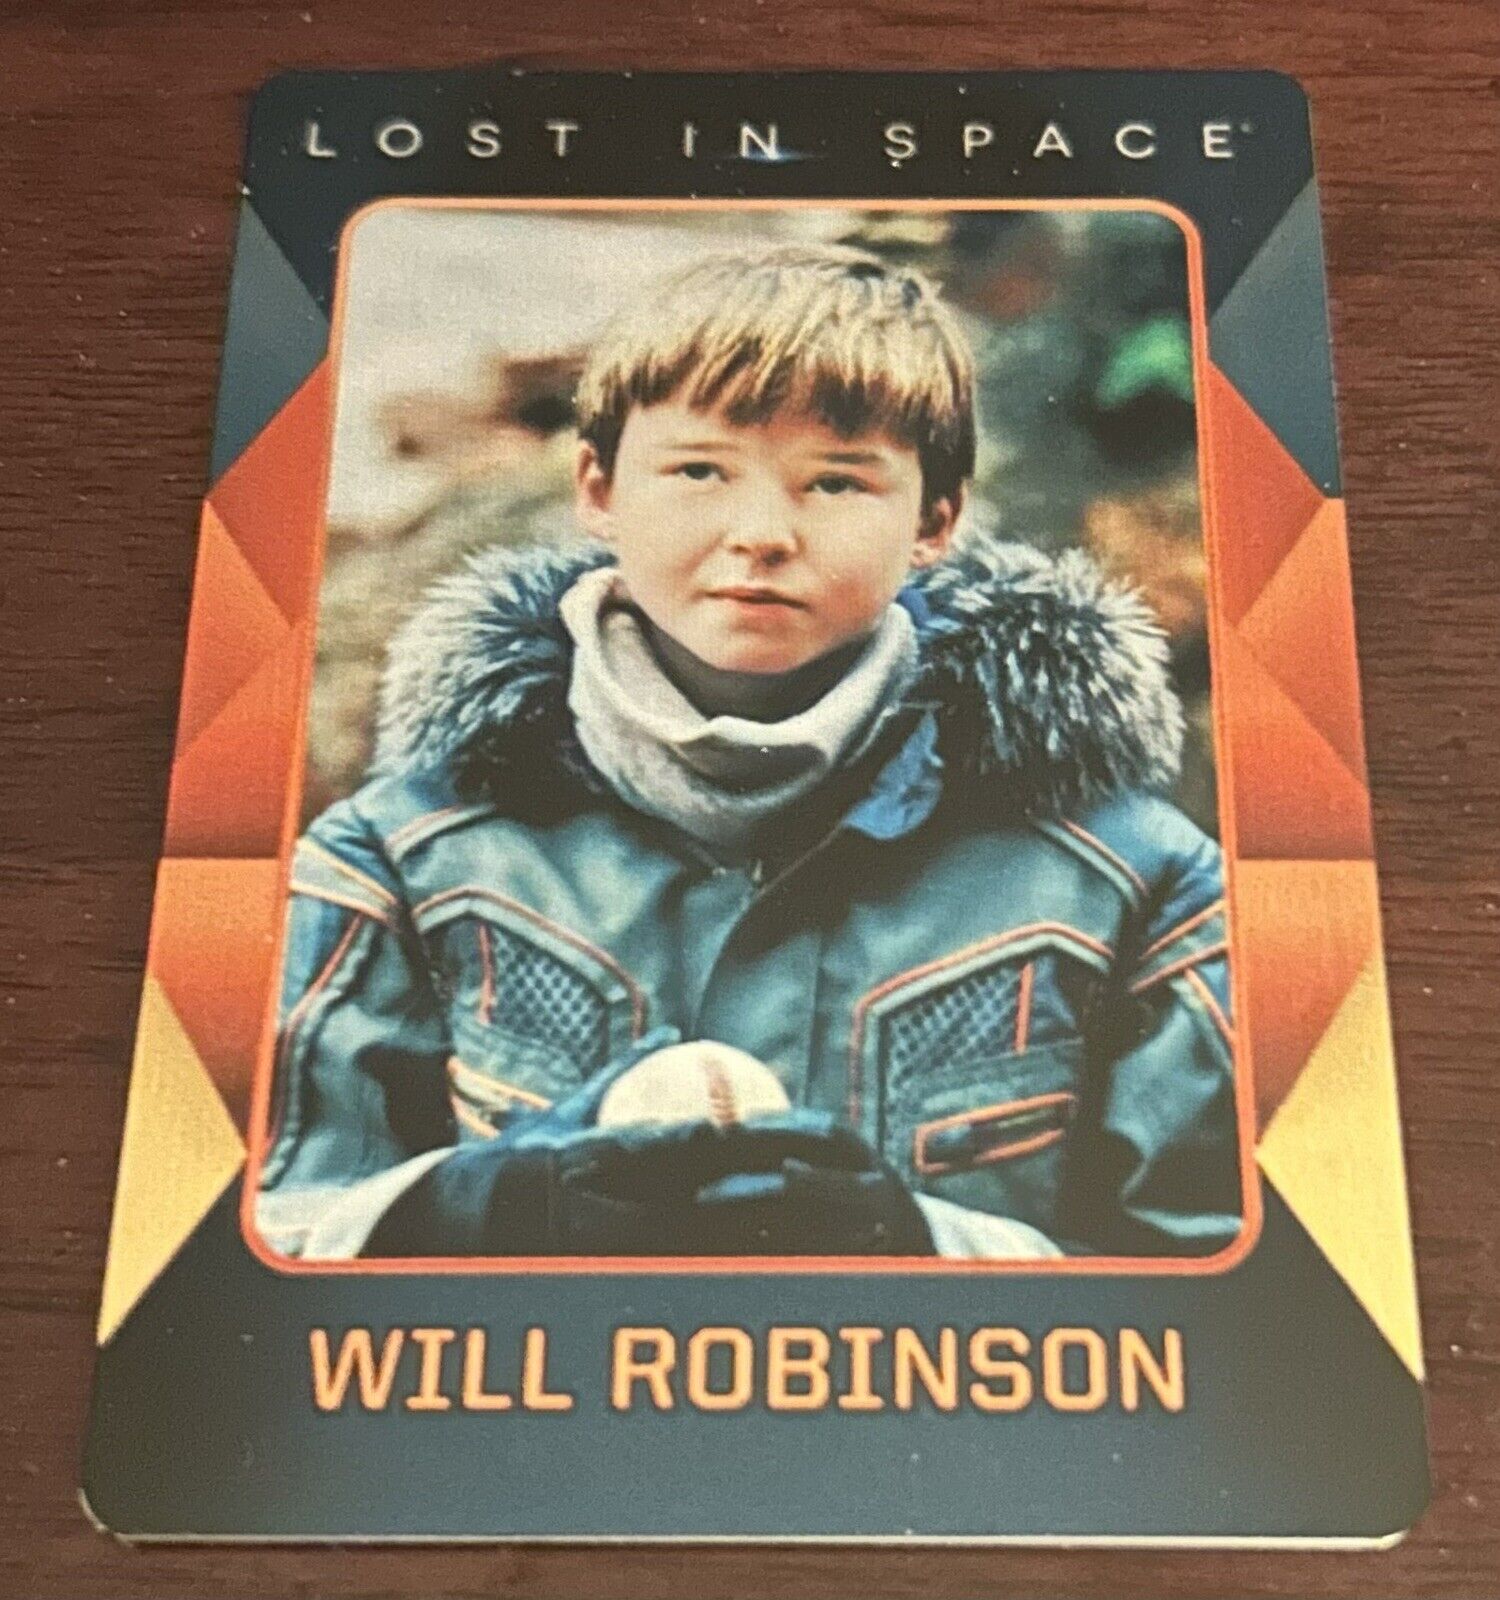 2018 Lost In Space WILL ROBINSON Metal Card